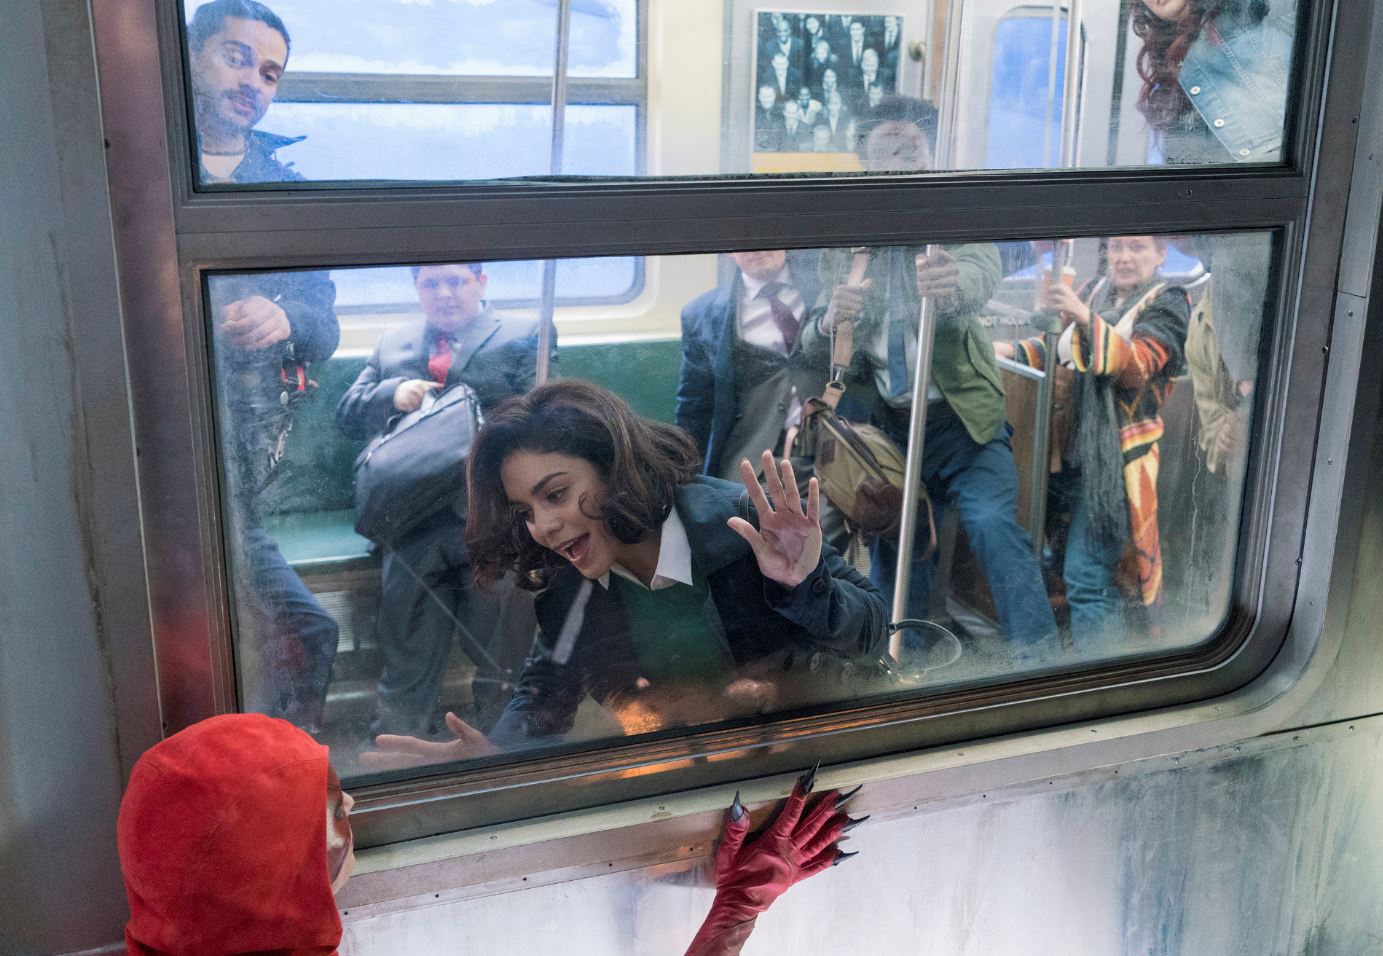 5 Things to Look Forward to in NBC’s Powerless